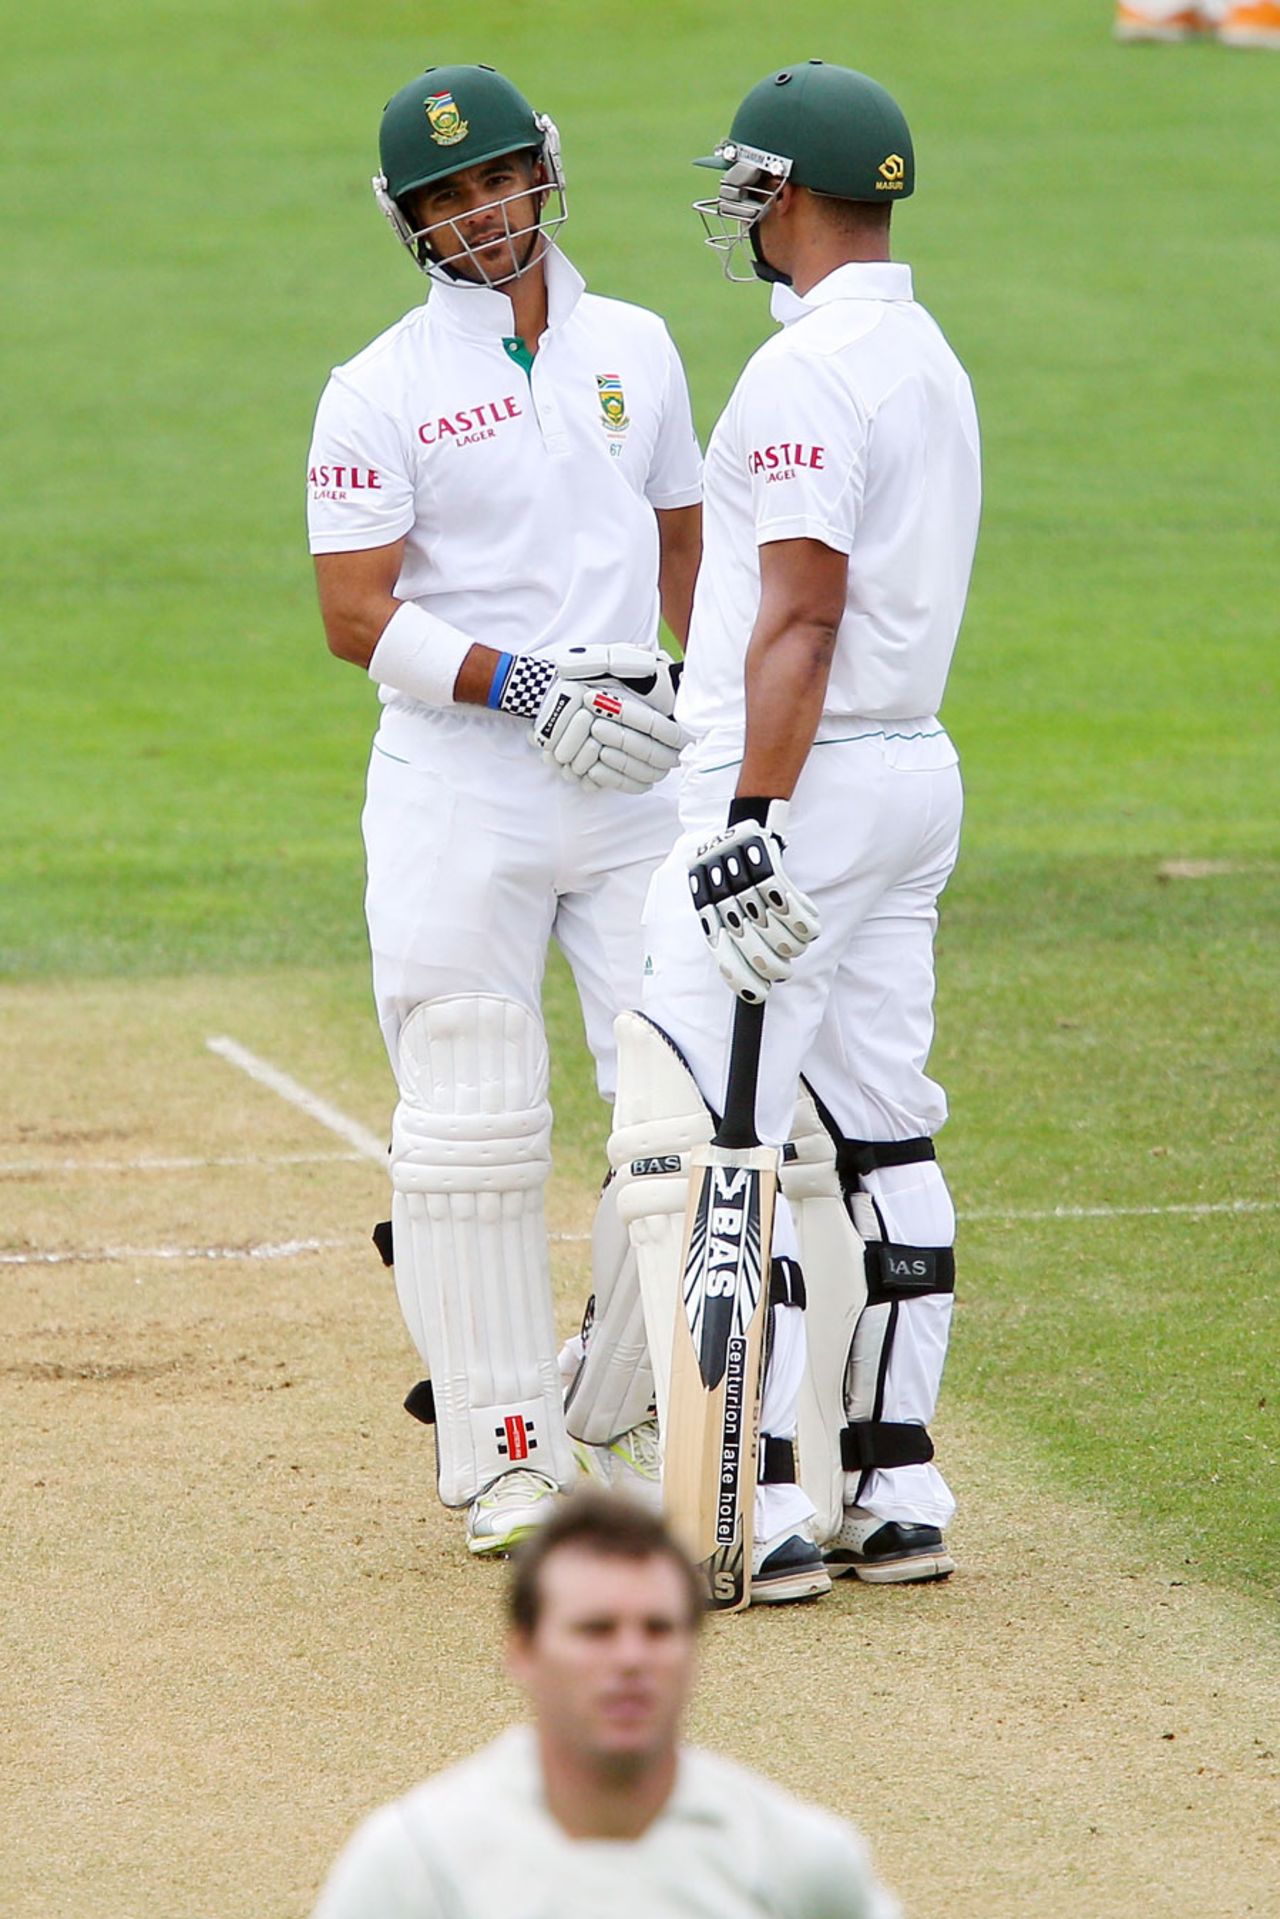 JP Duminy and Alviro Petersen talk during their partnership, New Zealand v South Africa, 3rd Test, Wellington, 2nd day, March 24, 2012